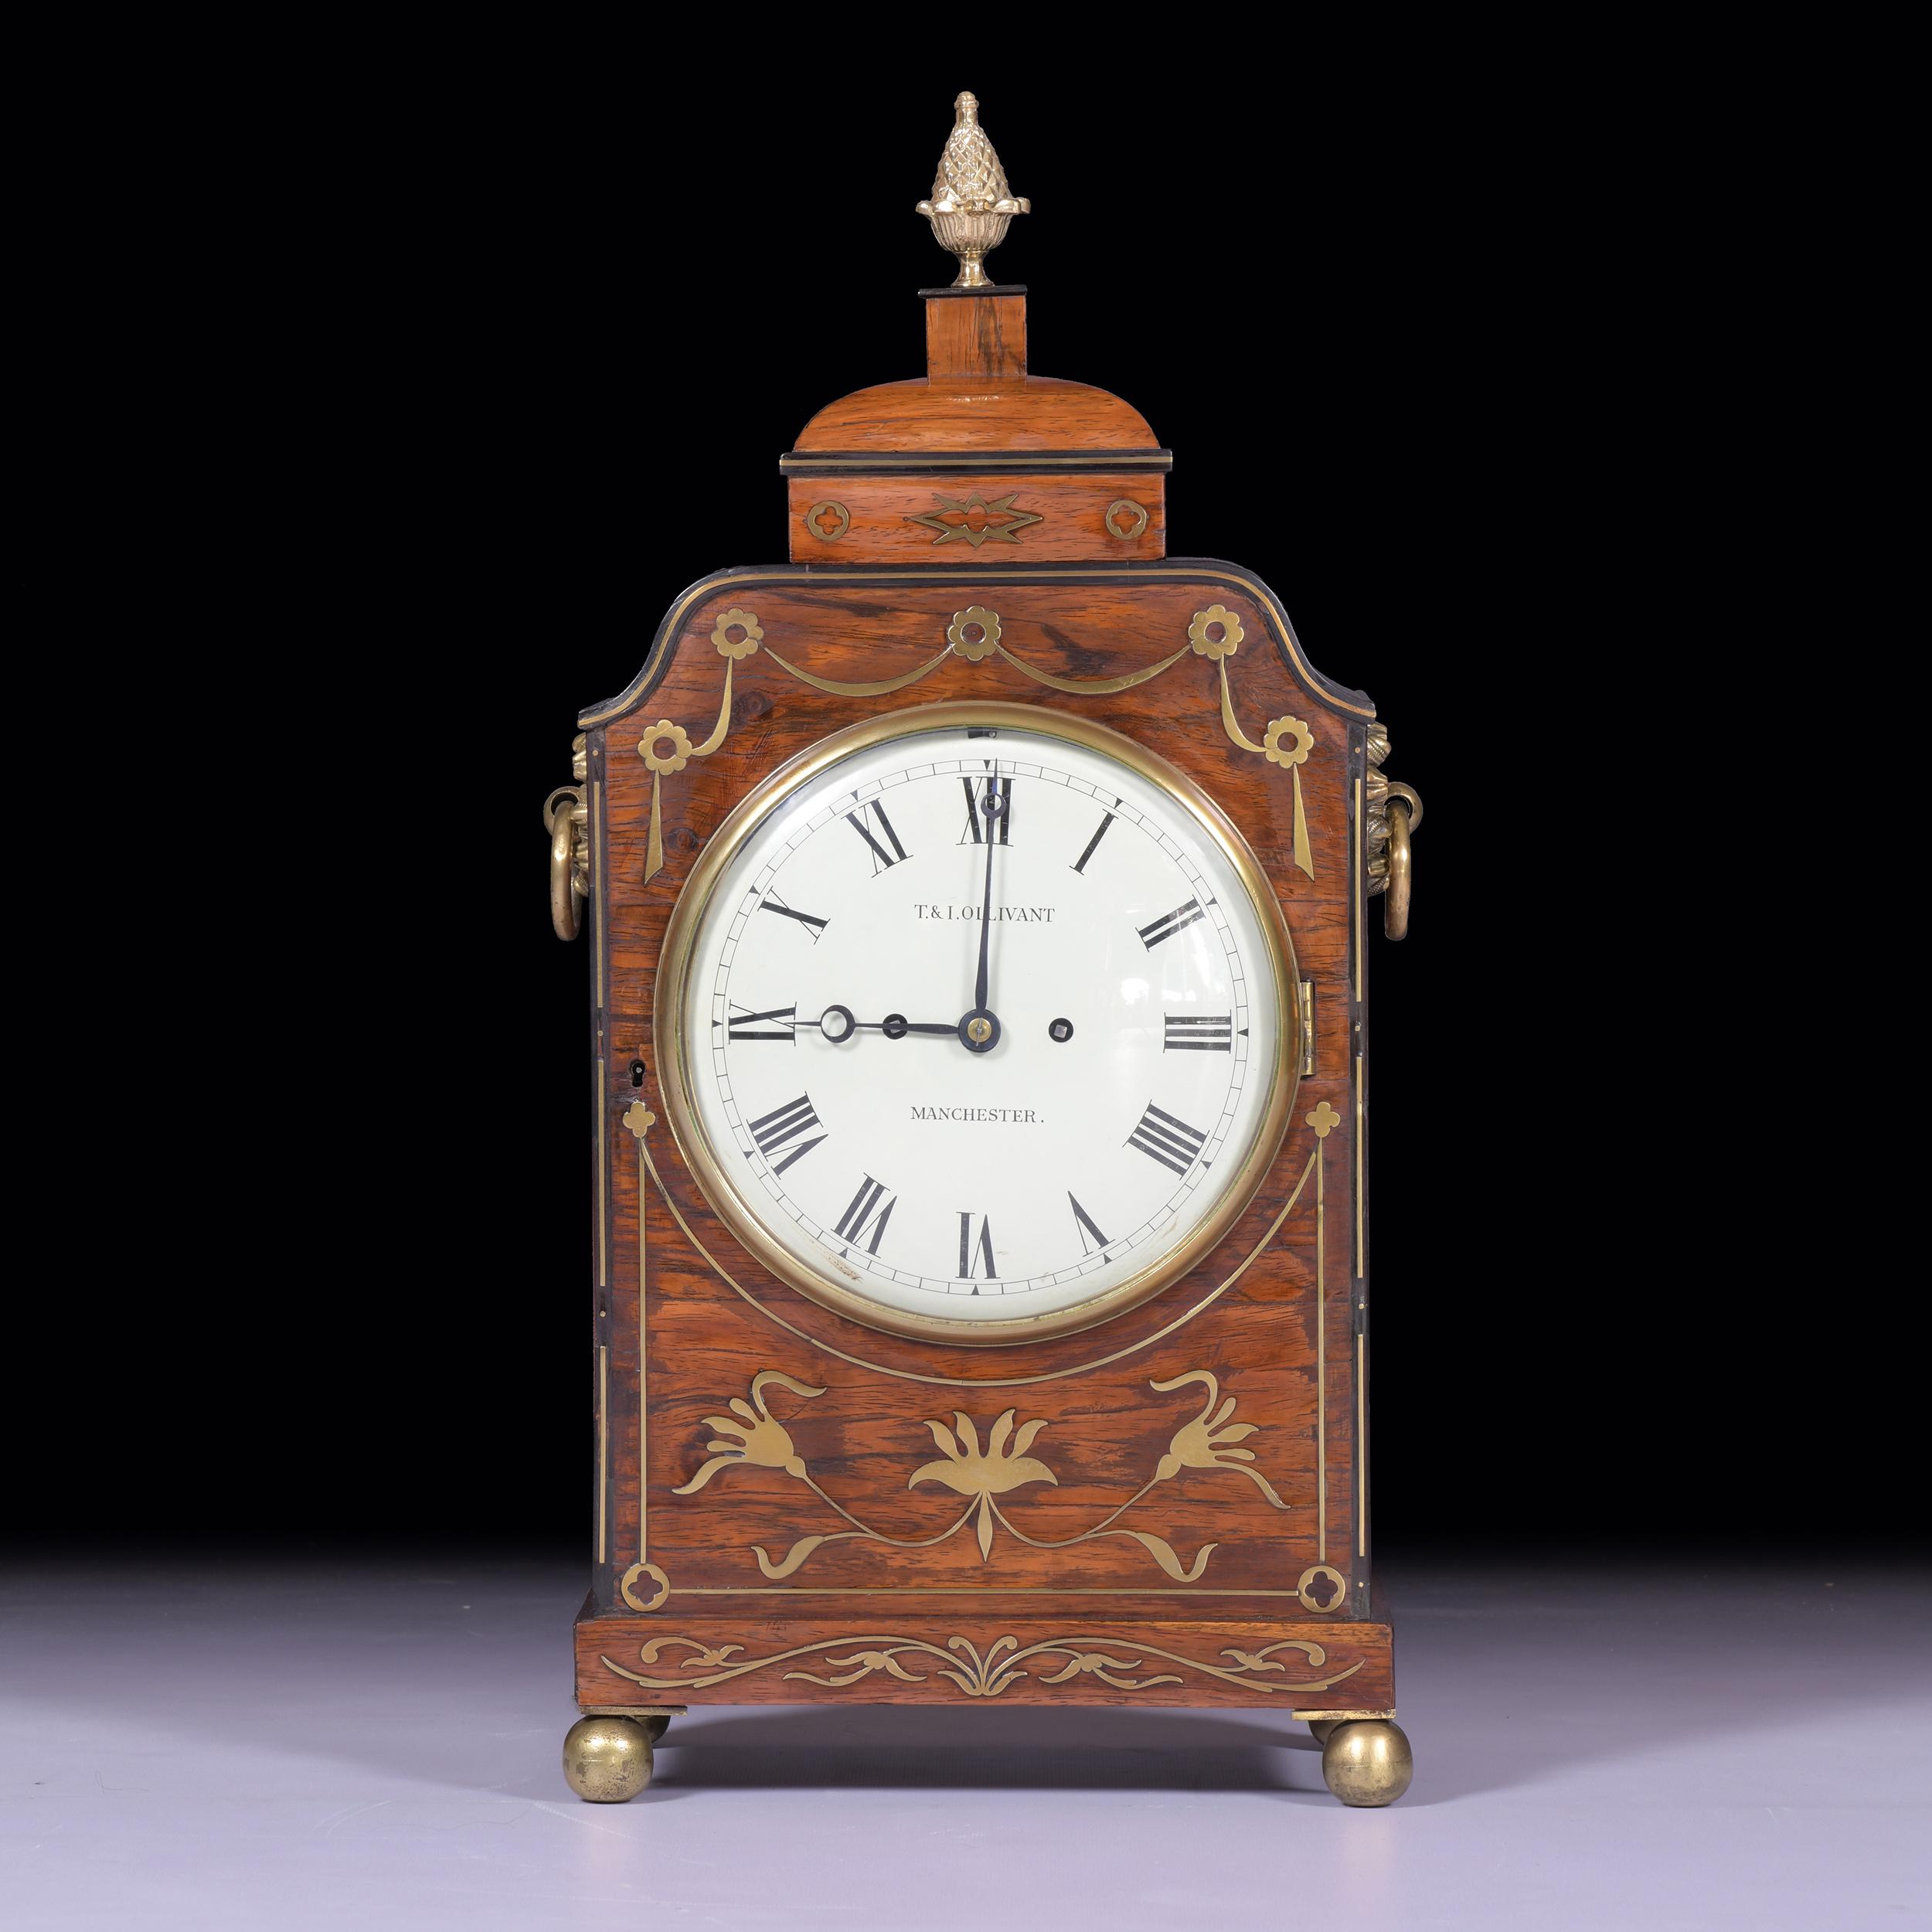 A very fine English regency period bracket clock with rosewood case, surmounted by a pineapple finial on a bell shaped caddy over a double steeped plinth . Substantial 8 Day twin fusee movement striking the hours on original bell. The 8? painted